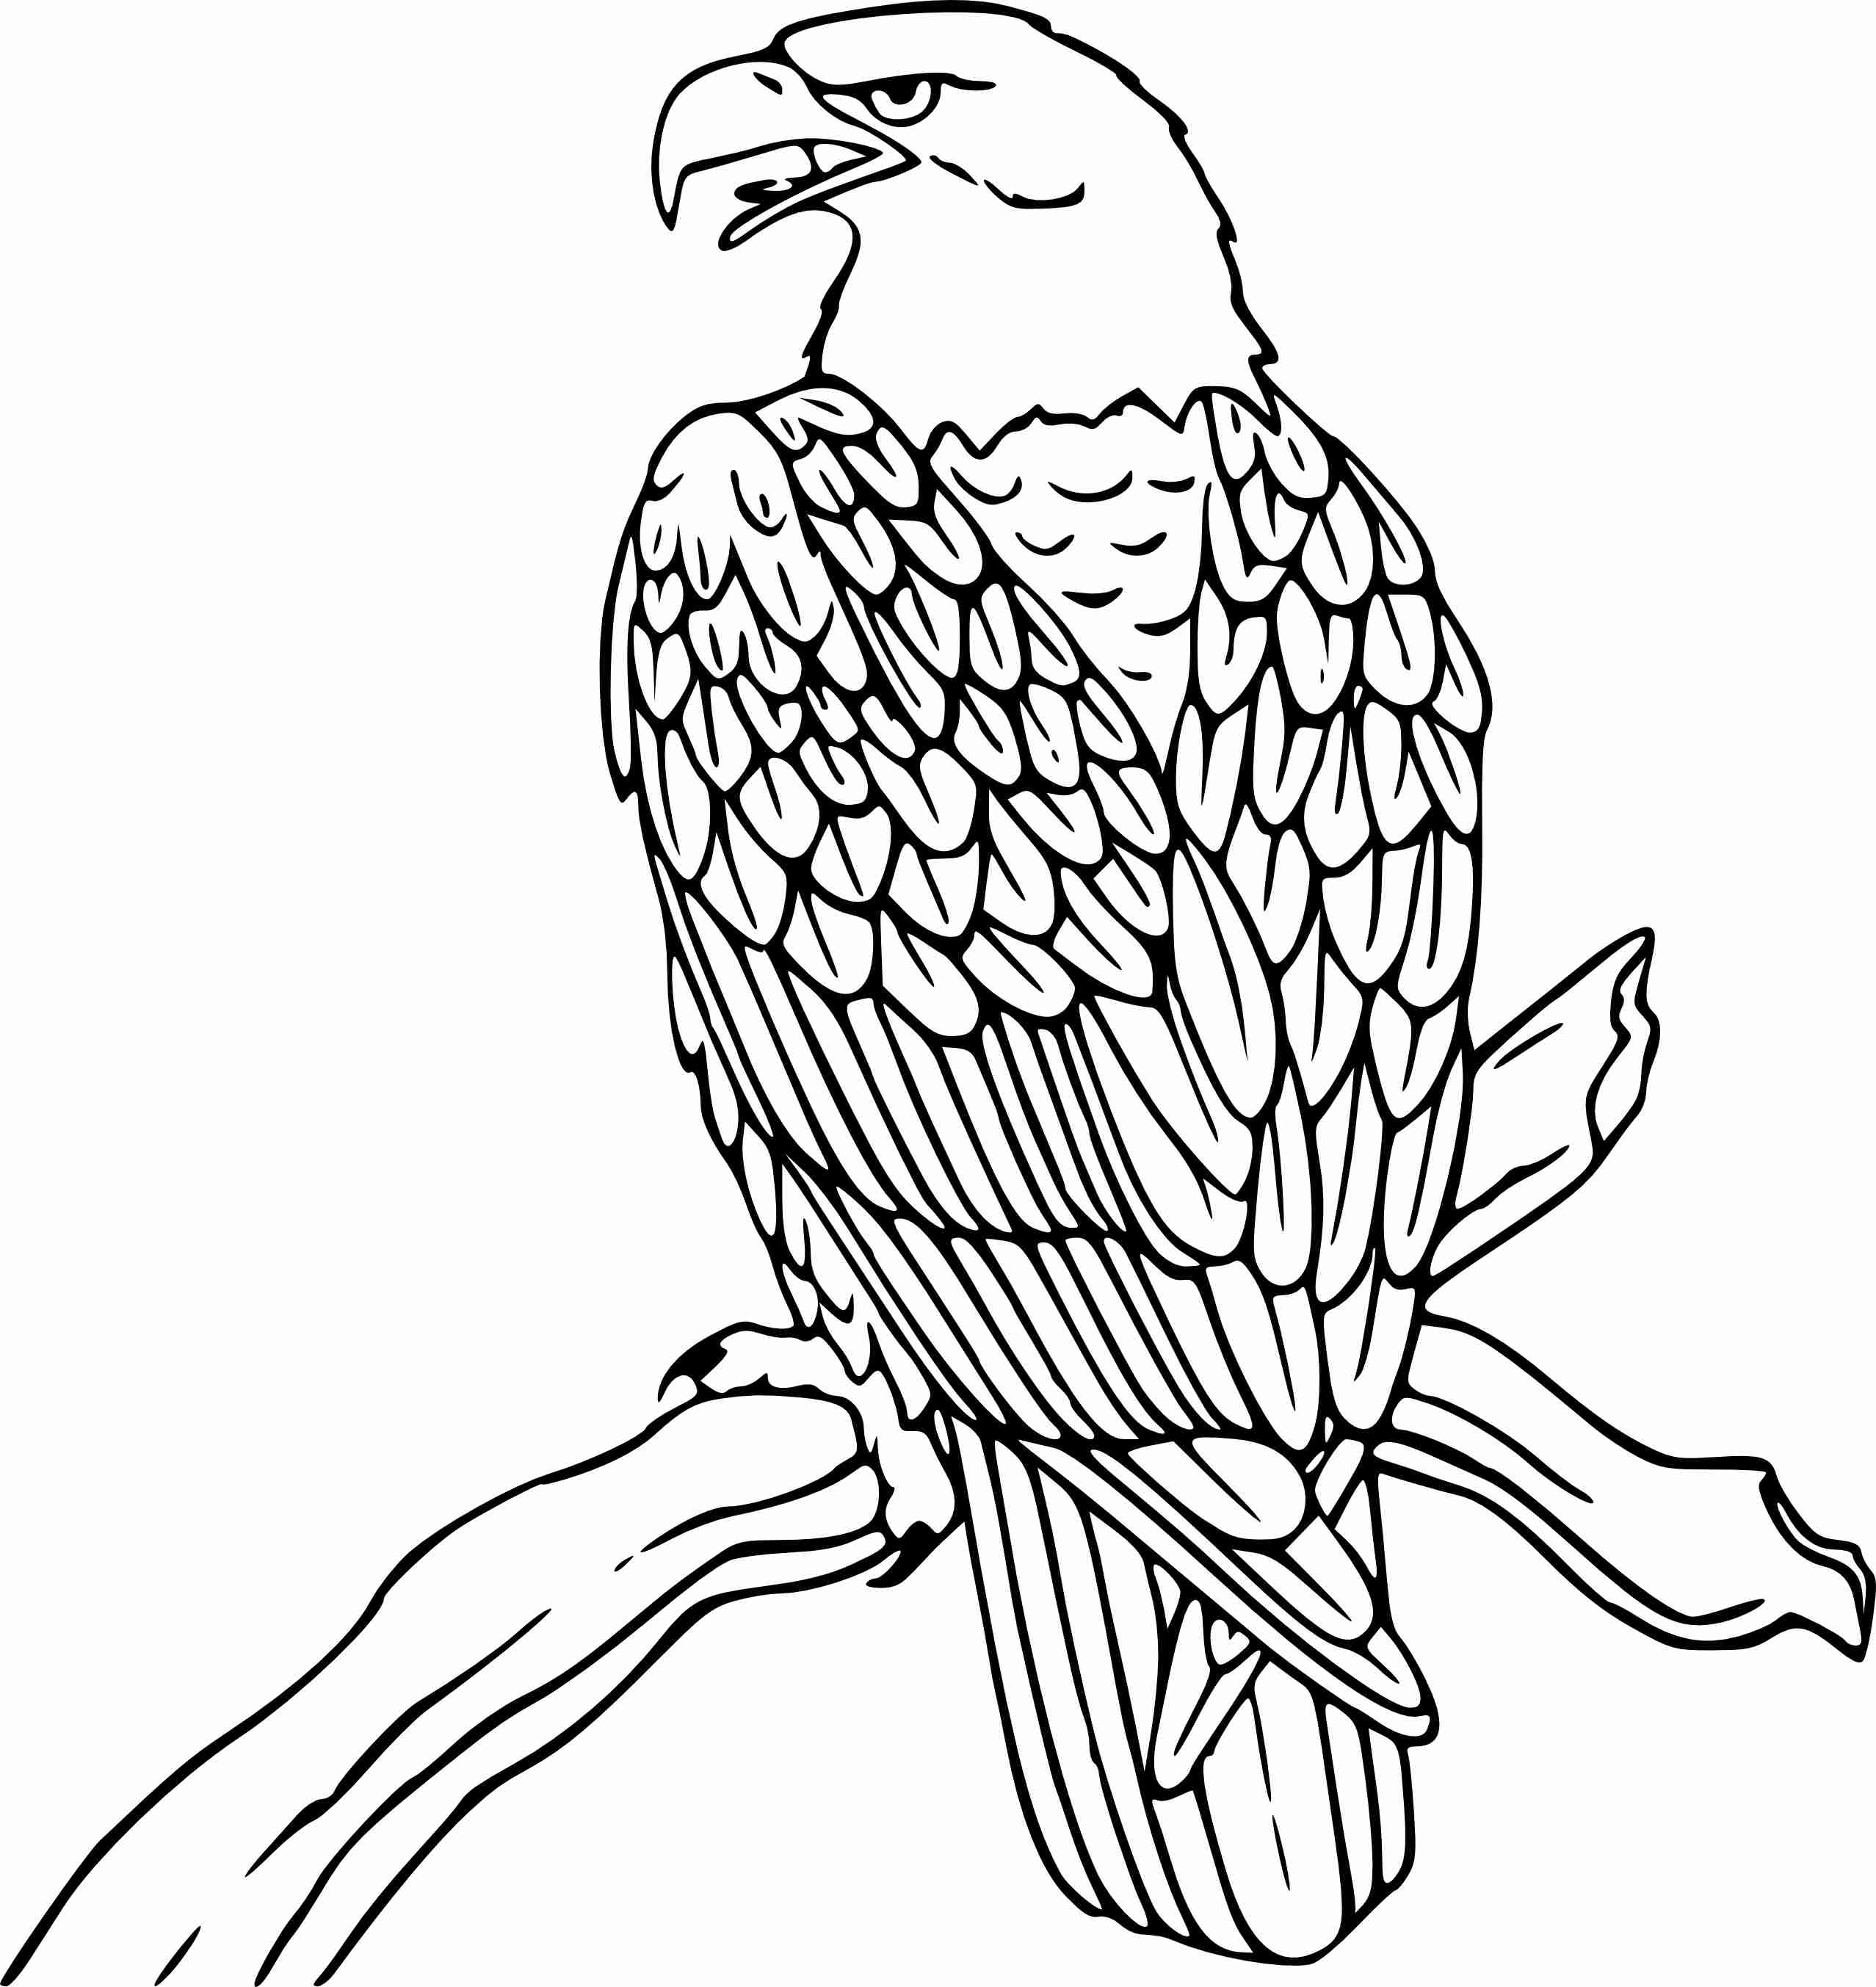 American Bald Eagle Coloring Page at GetColorings.com | Free printable